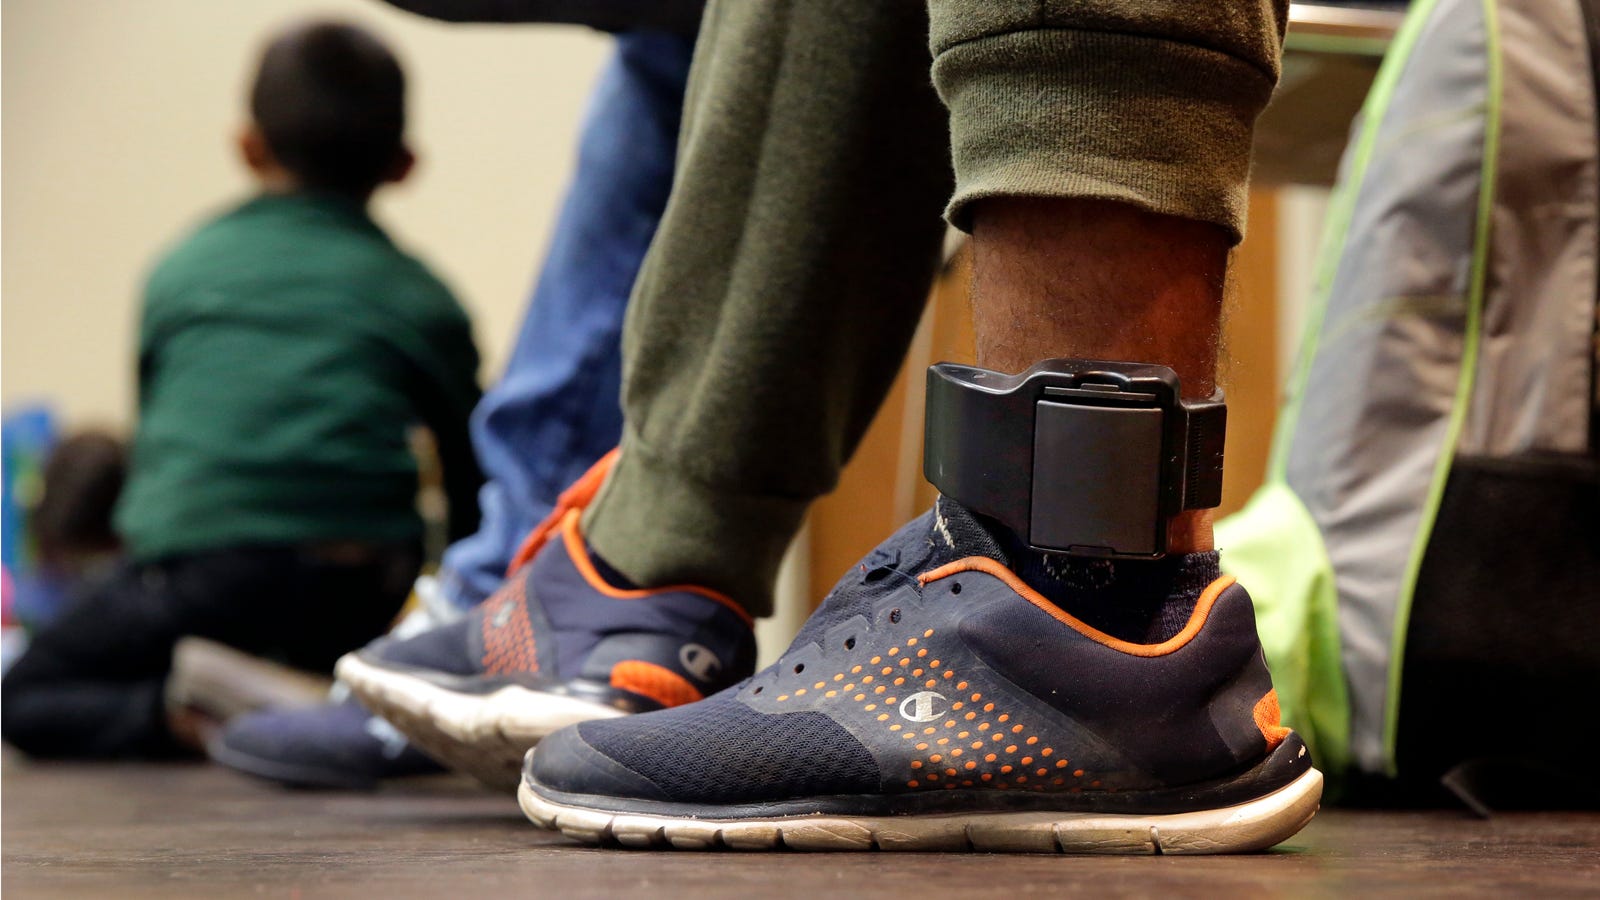 Chicago s New Ankle Monitors Can Record Kids Without Their Consent